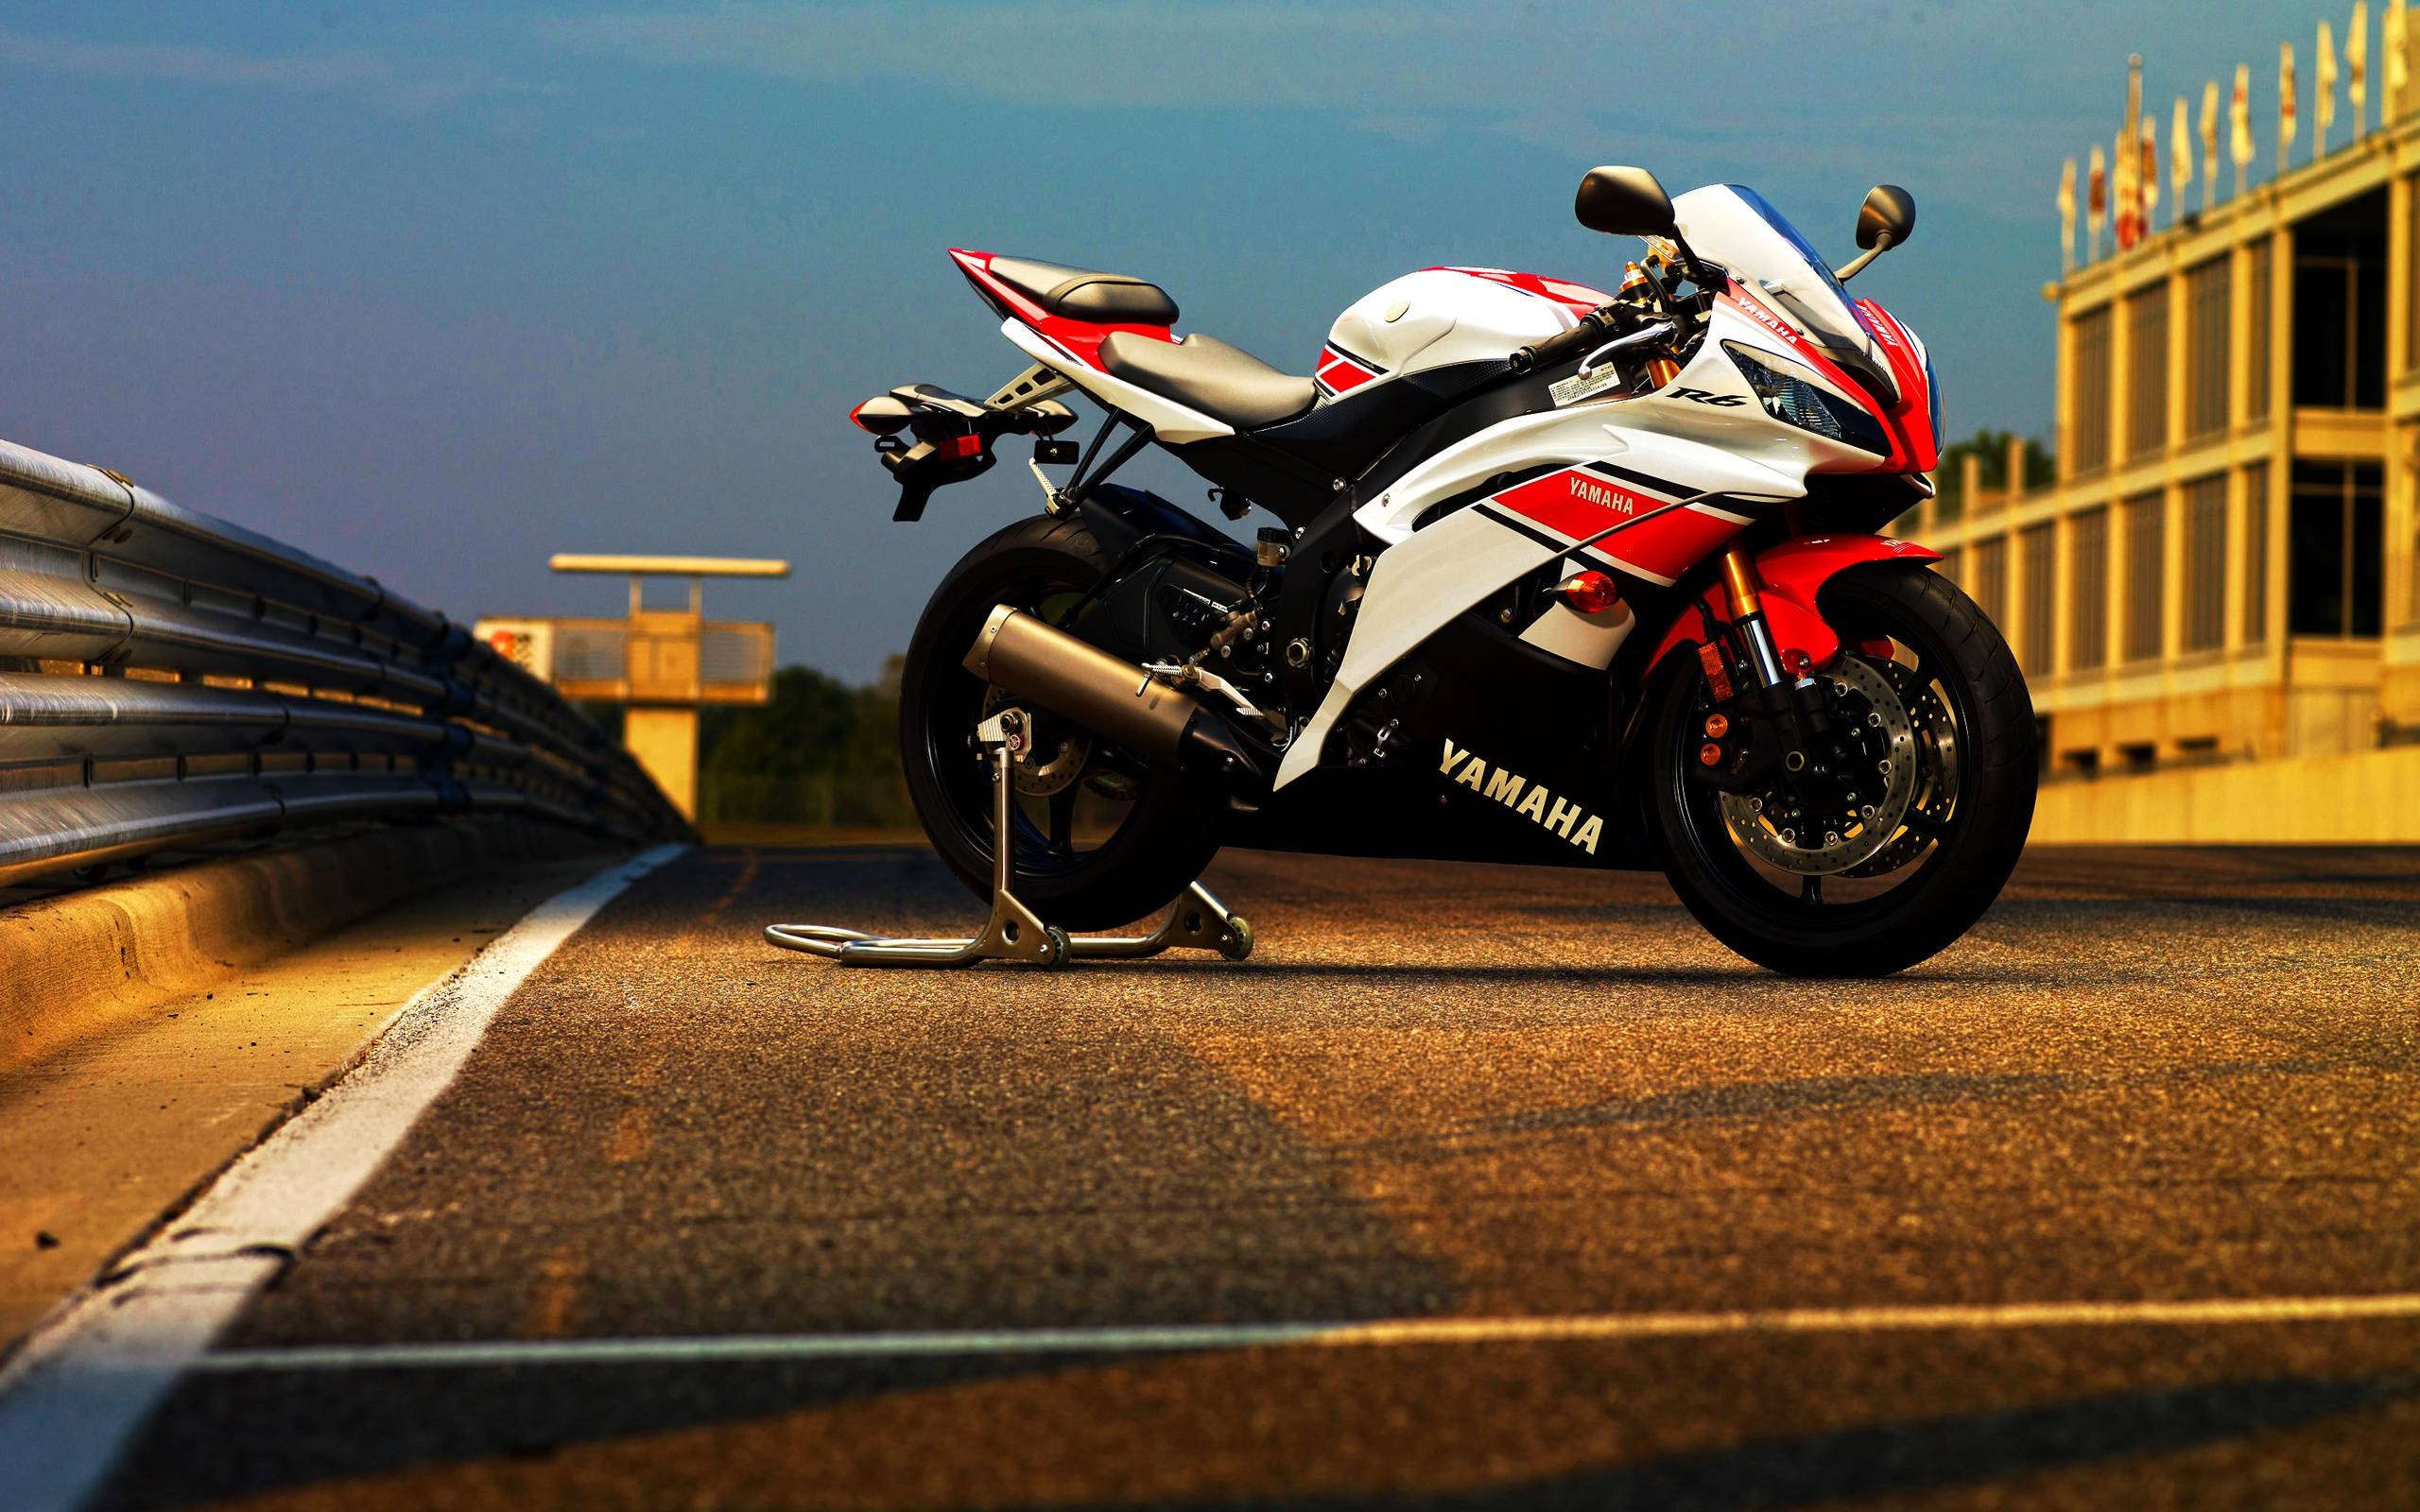 HDQ Cover Yamaha R6 Background Image for Free